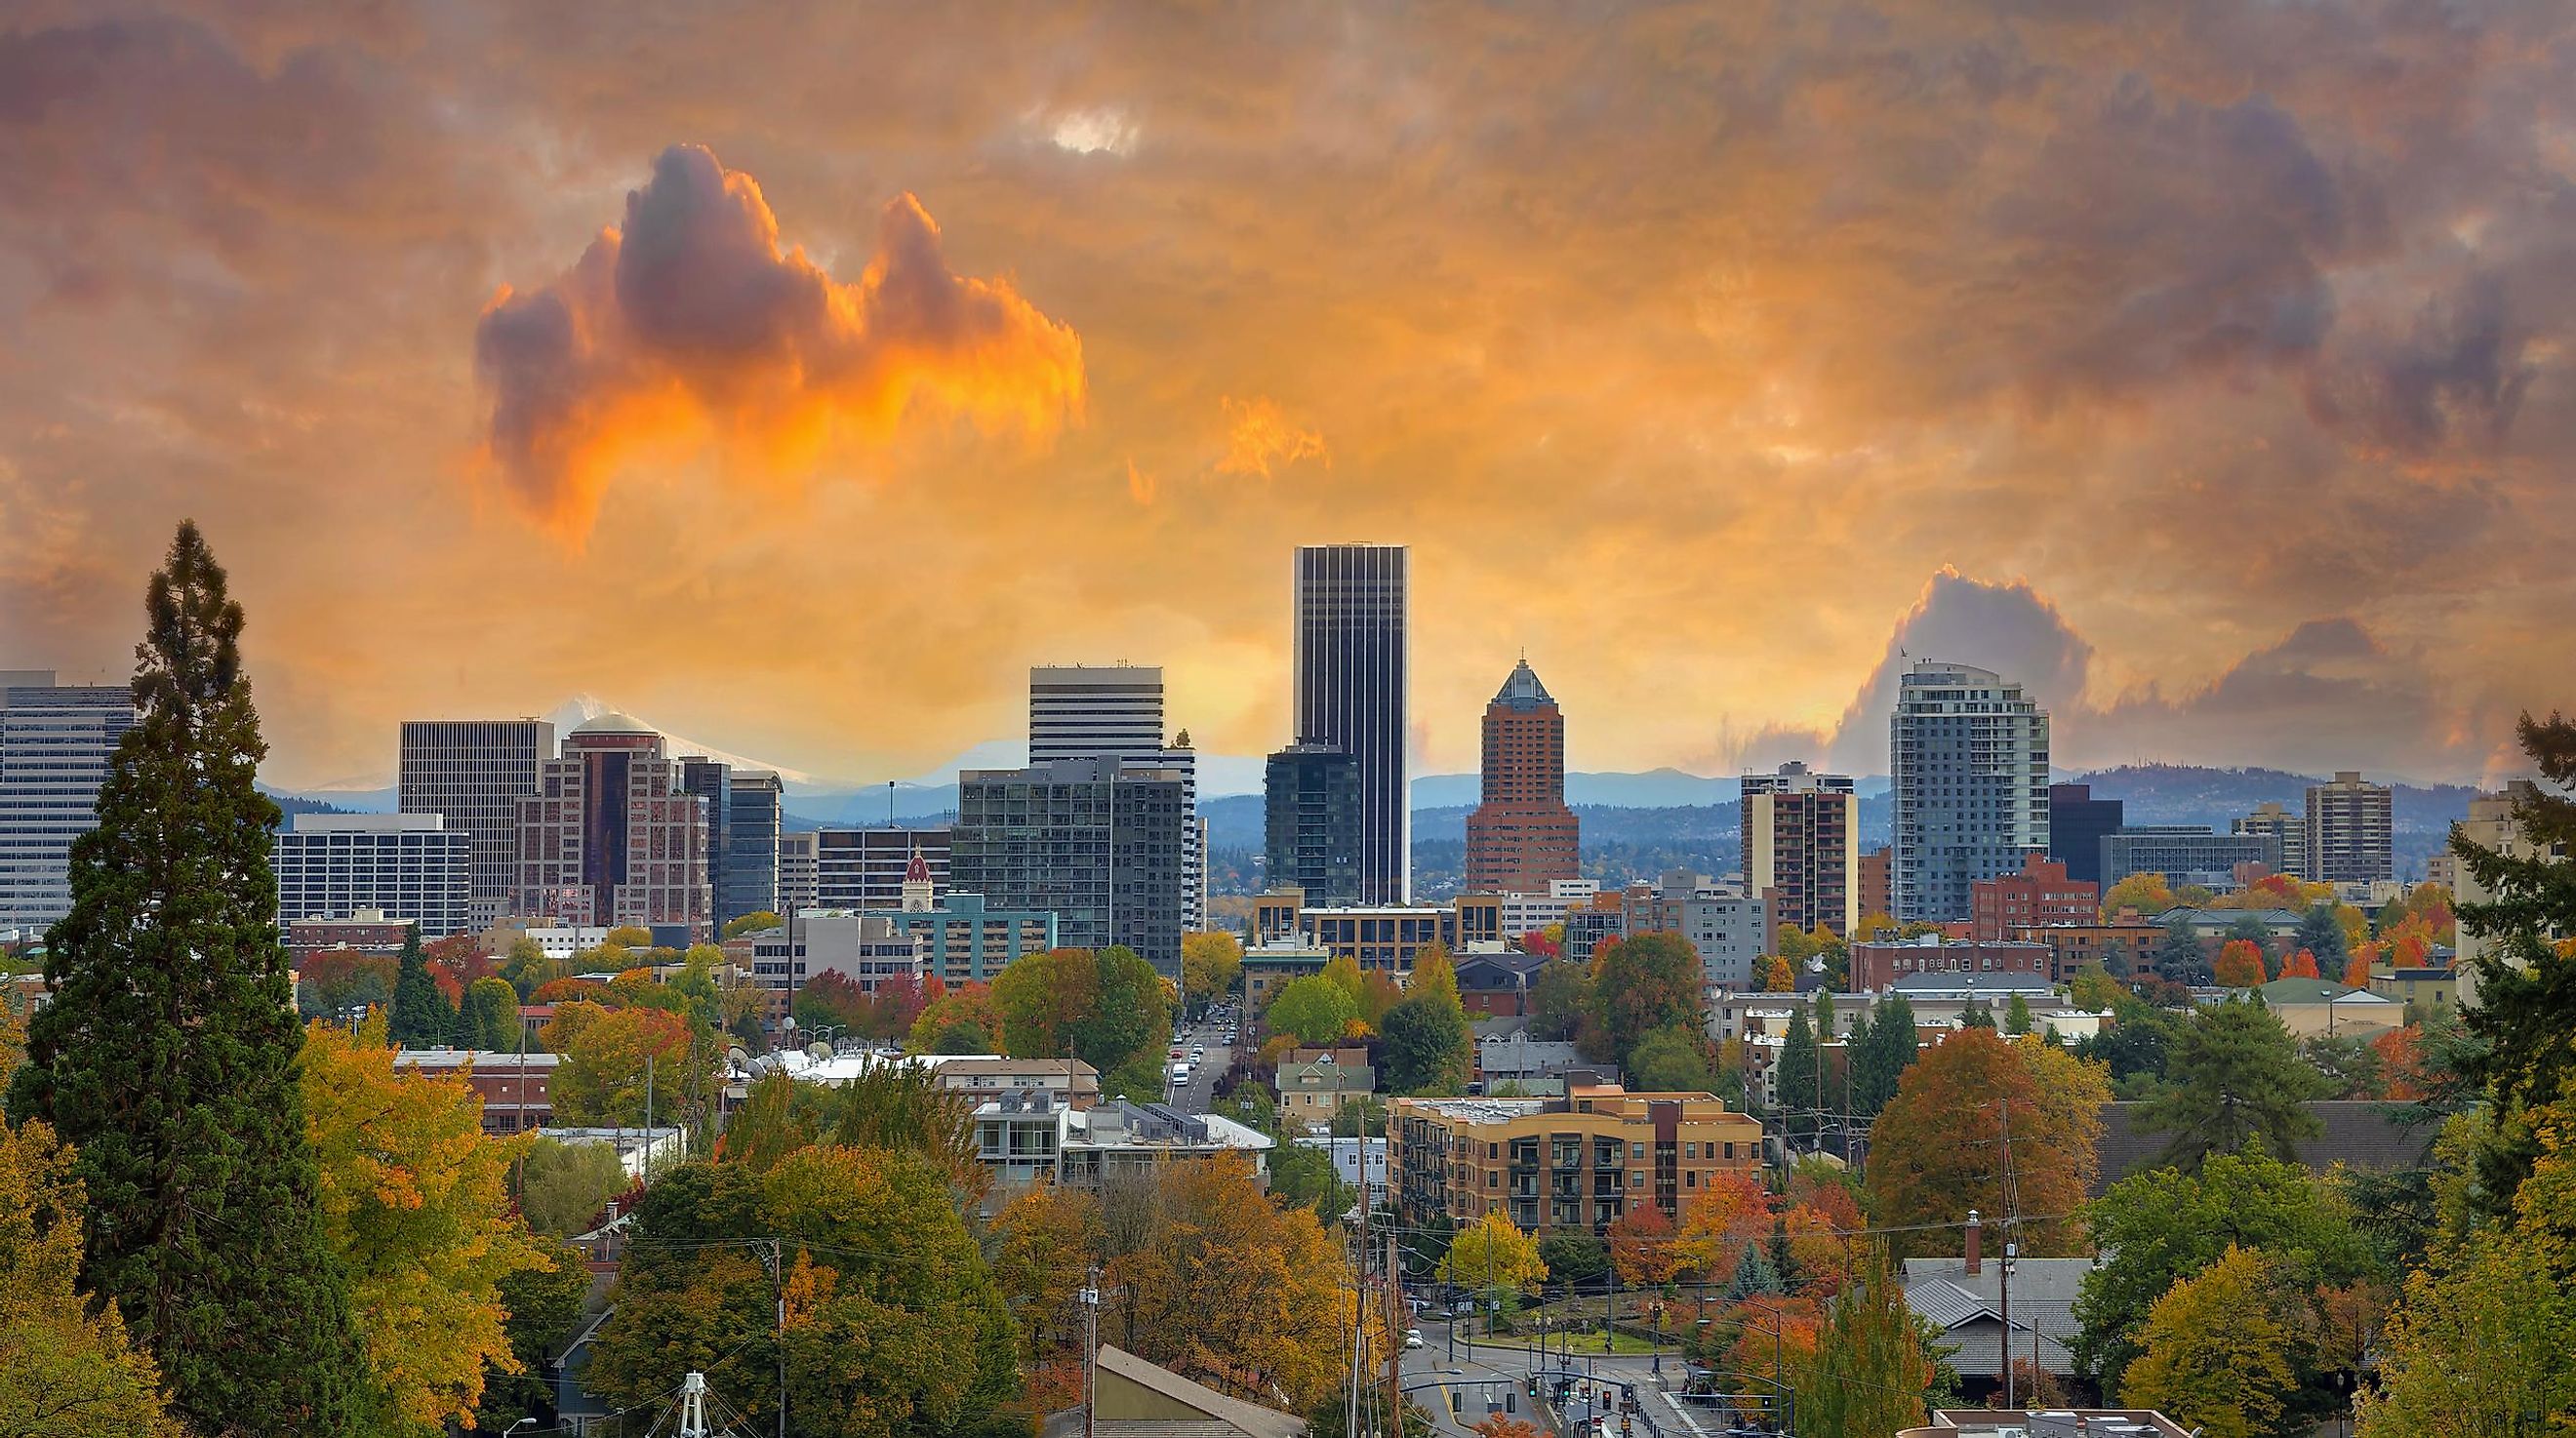 Portland Oregon Downtown City During Sunset in the Fall Season